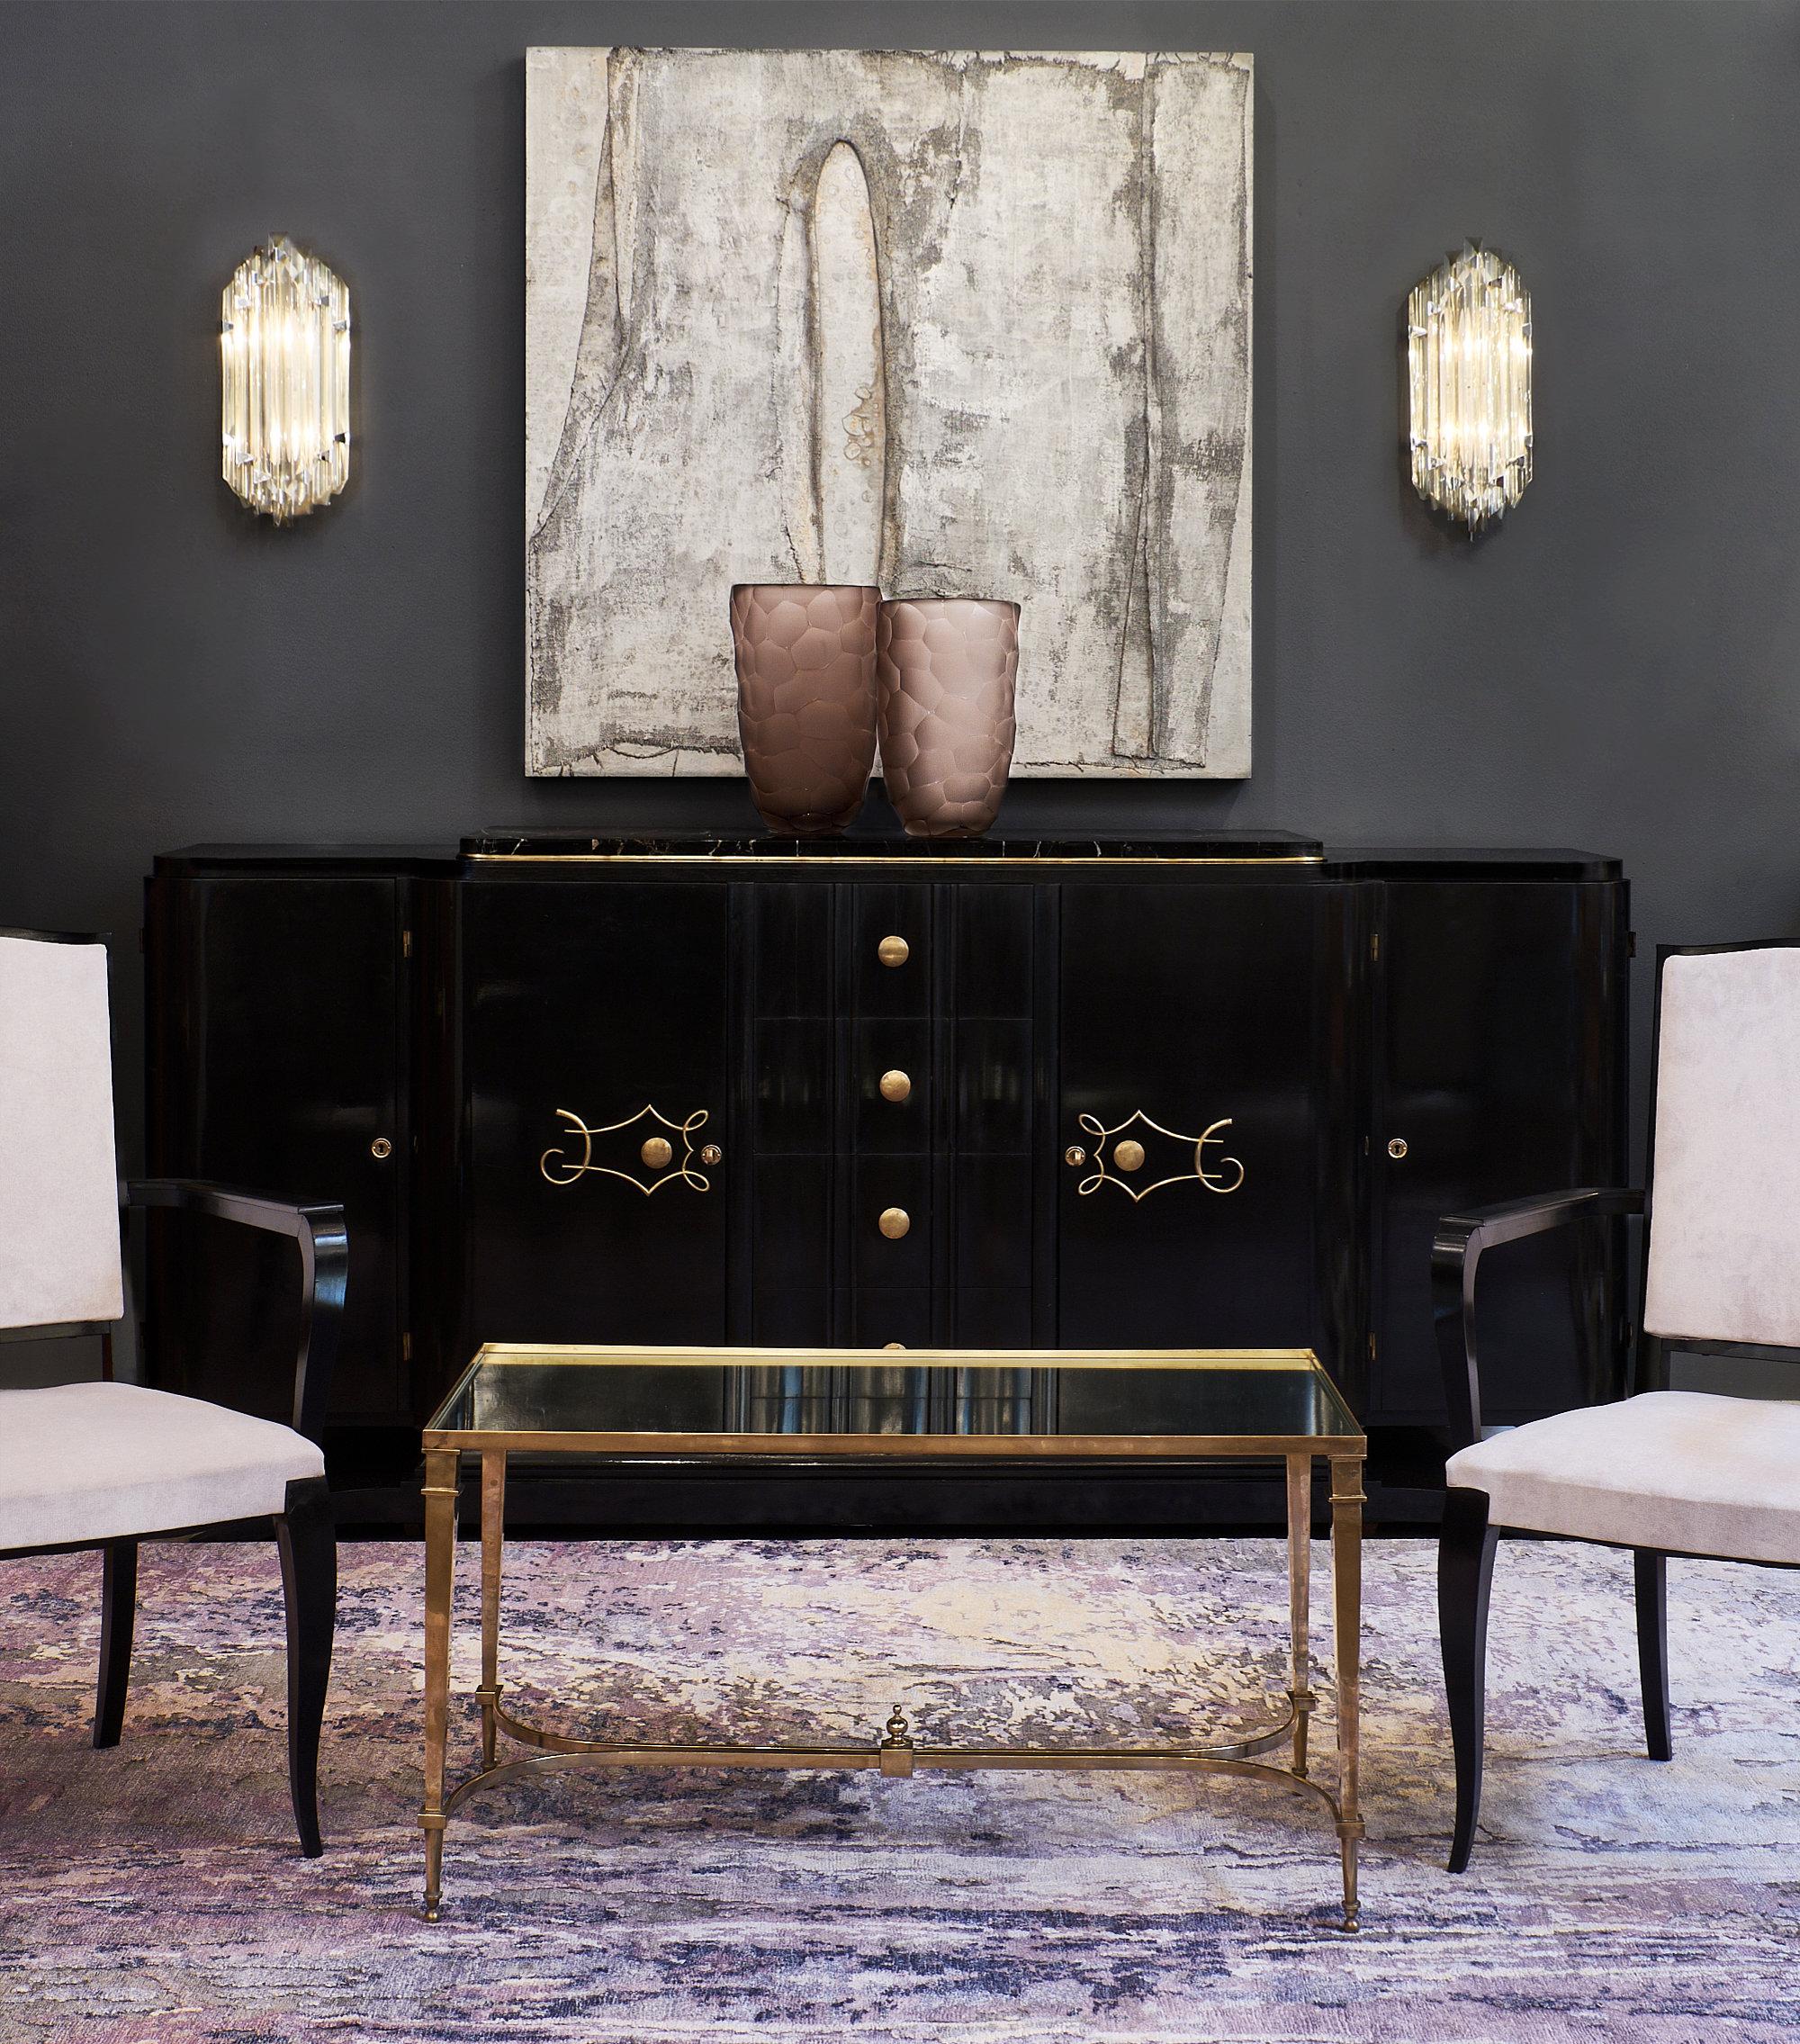 A fine French Art Deco period buffet or enfilade made of mahogany, ebonized and finished in a lustrous French polish. This piece is in mint restored condition with the unique and intact “Portor” marble slab. This elegant credenza features two doors